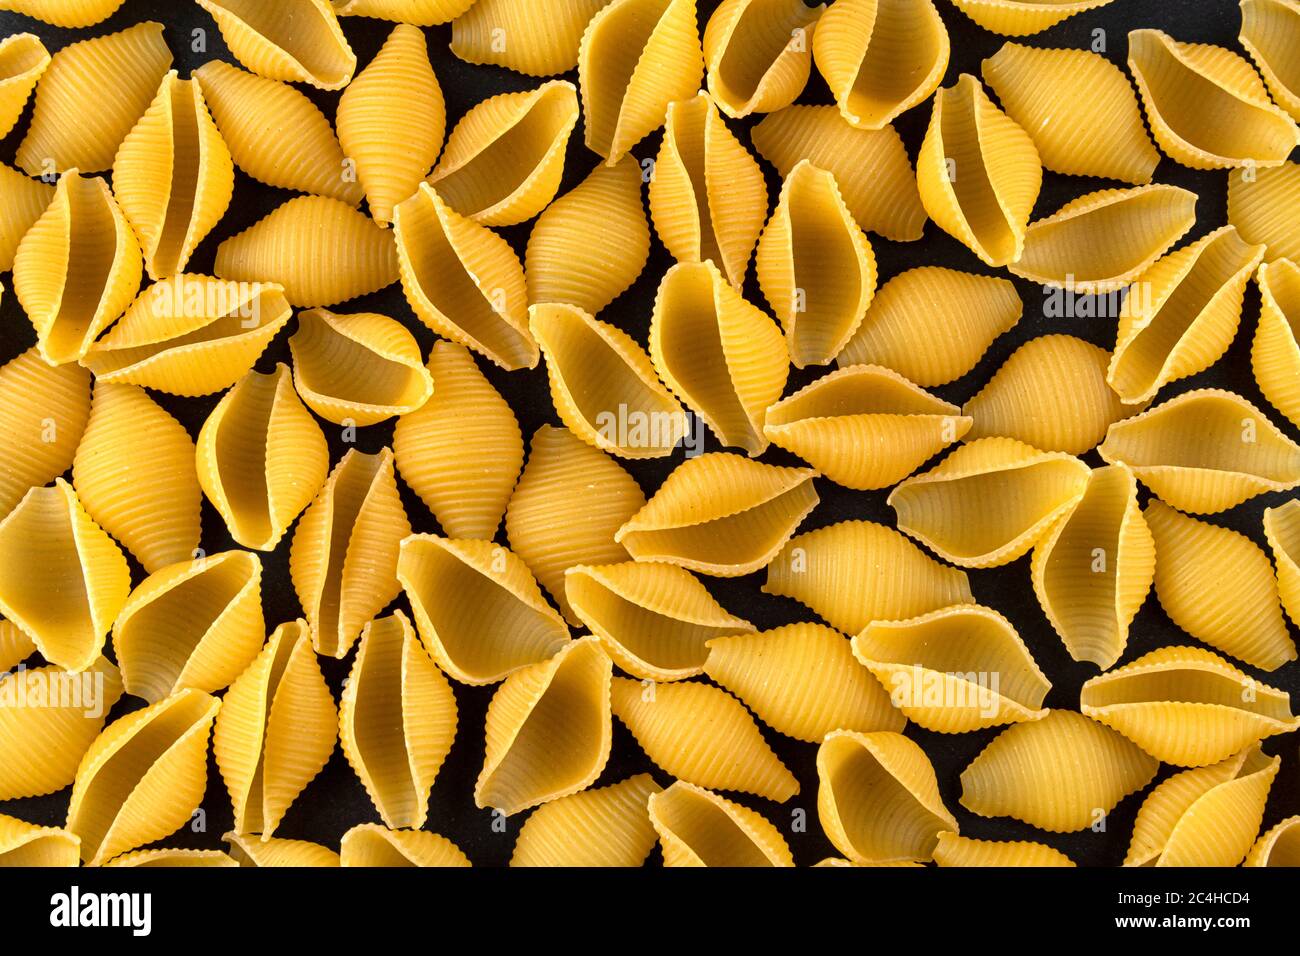 Dry shell pasta pattern on black background, top view Stock Photo